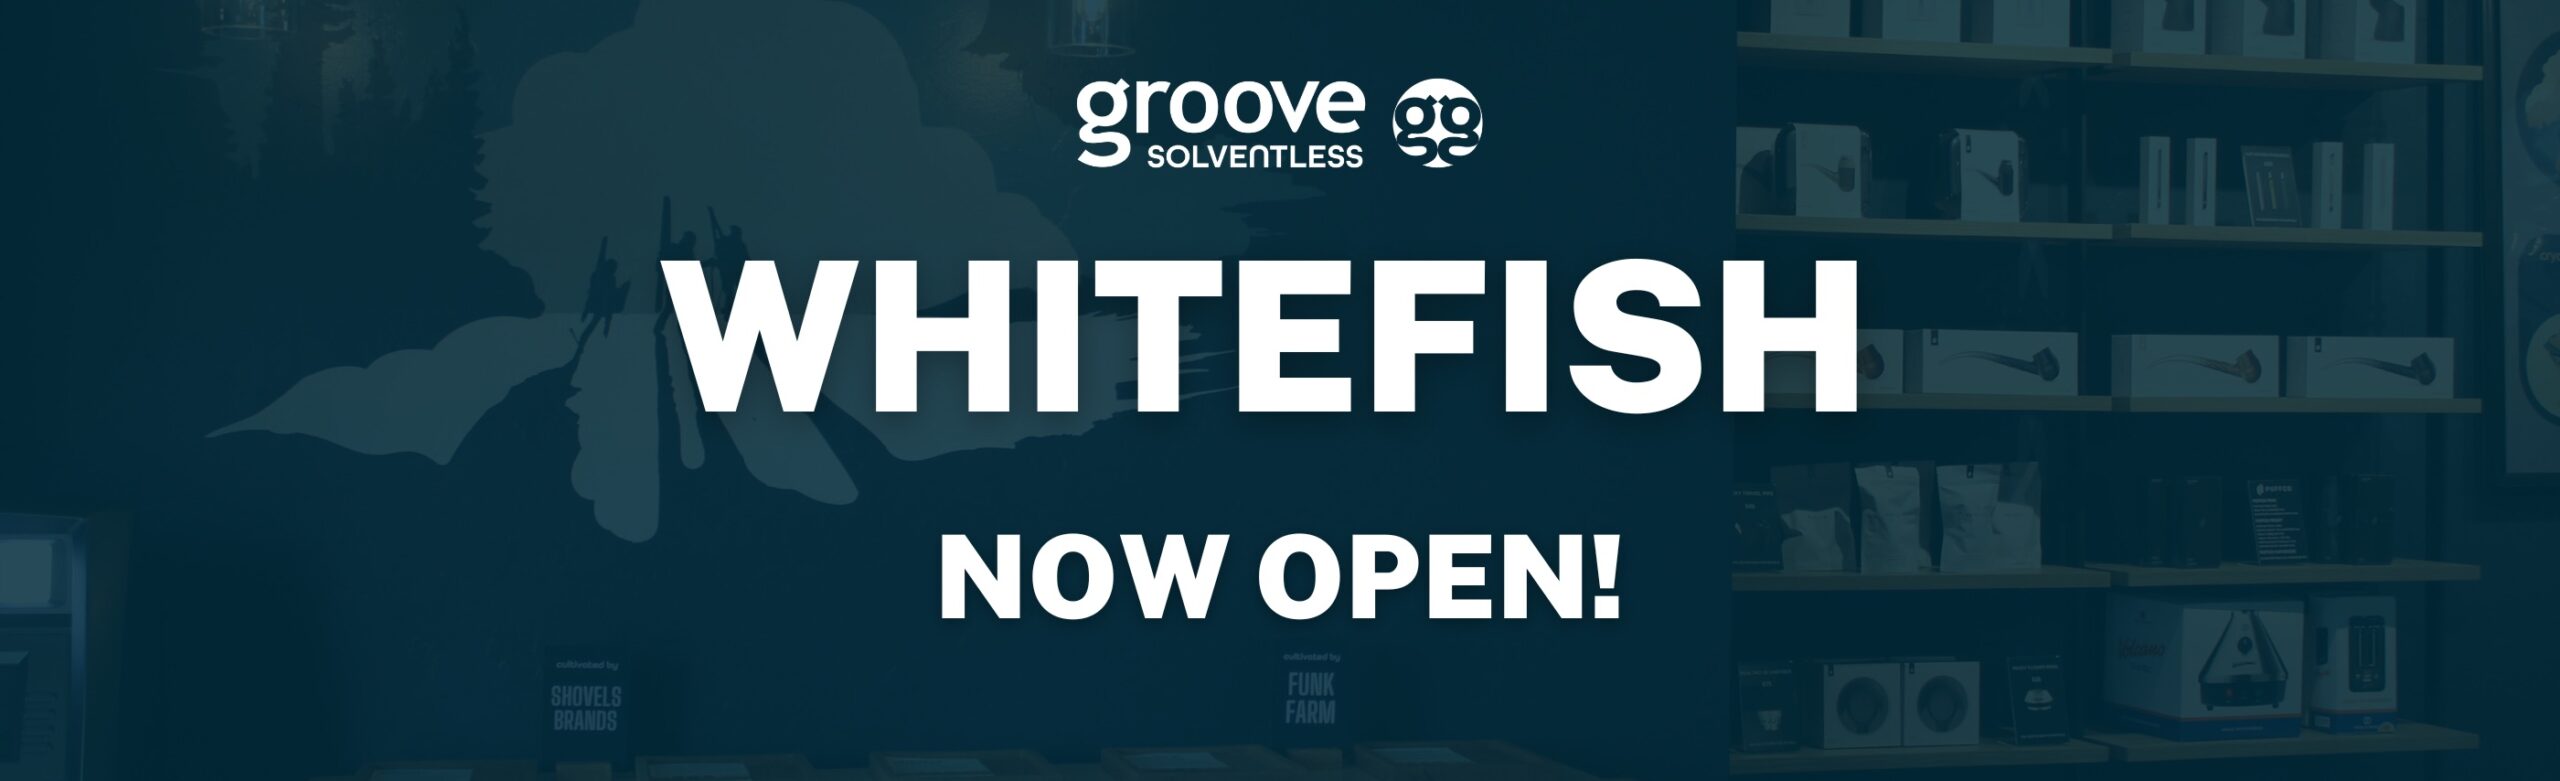 Groove Solventless in Whitefish is NOW OPEN! Image